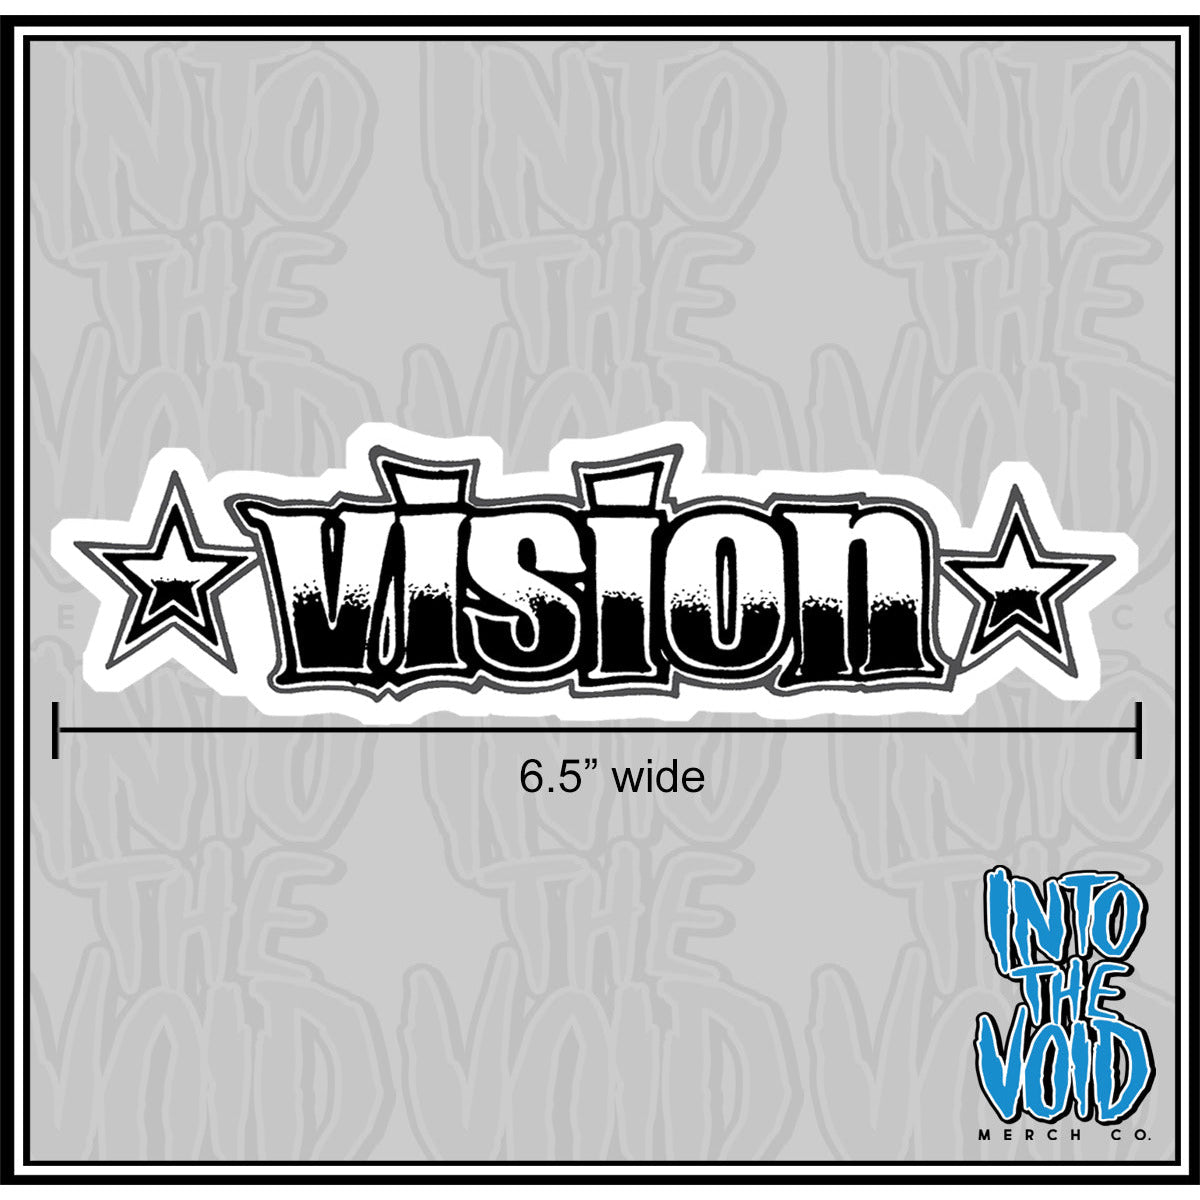 VISION - 6.5" OLD-FASHIONED LOGO Sticker - INTO THE VOID Merch Co.